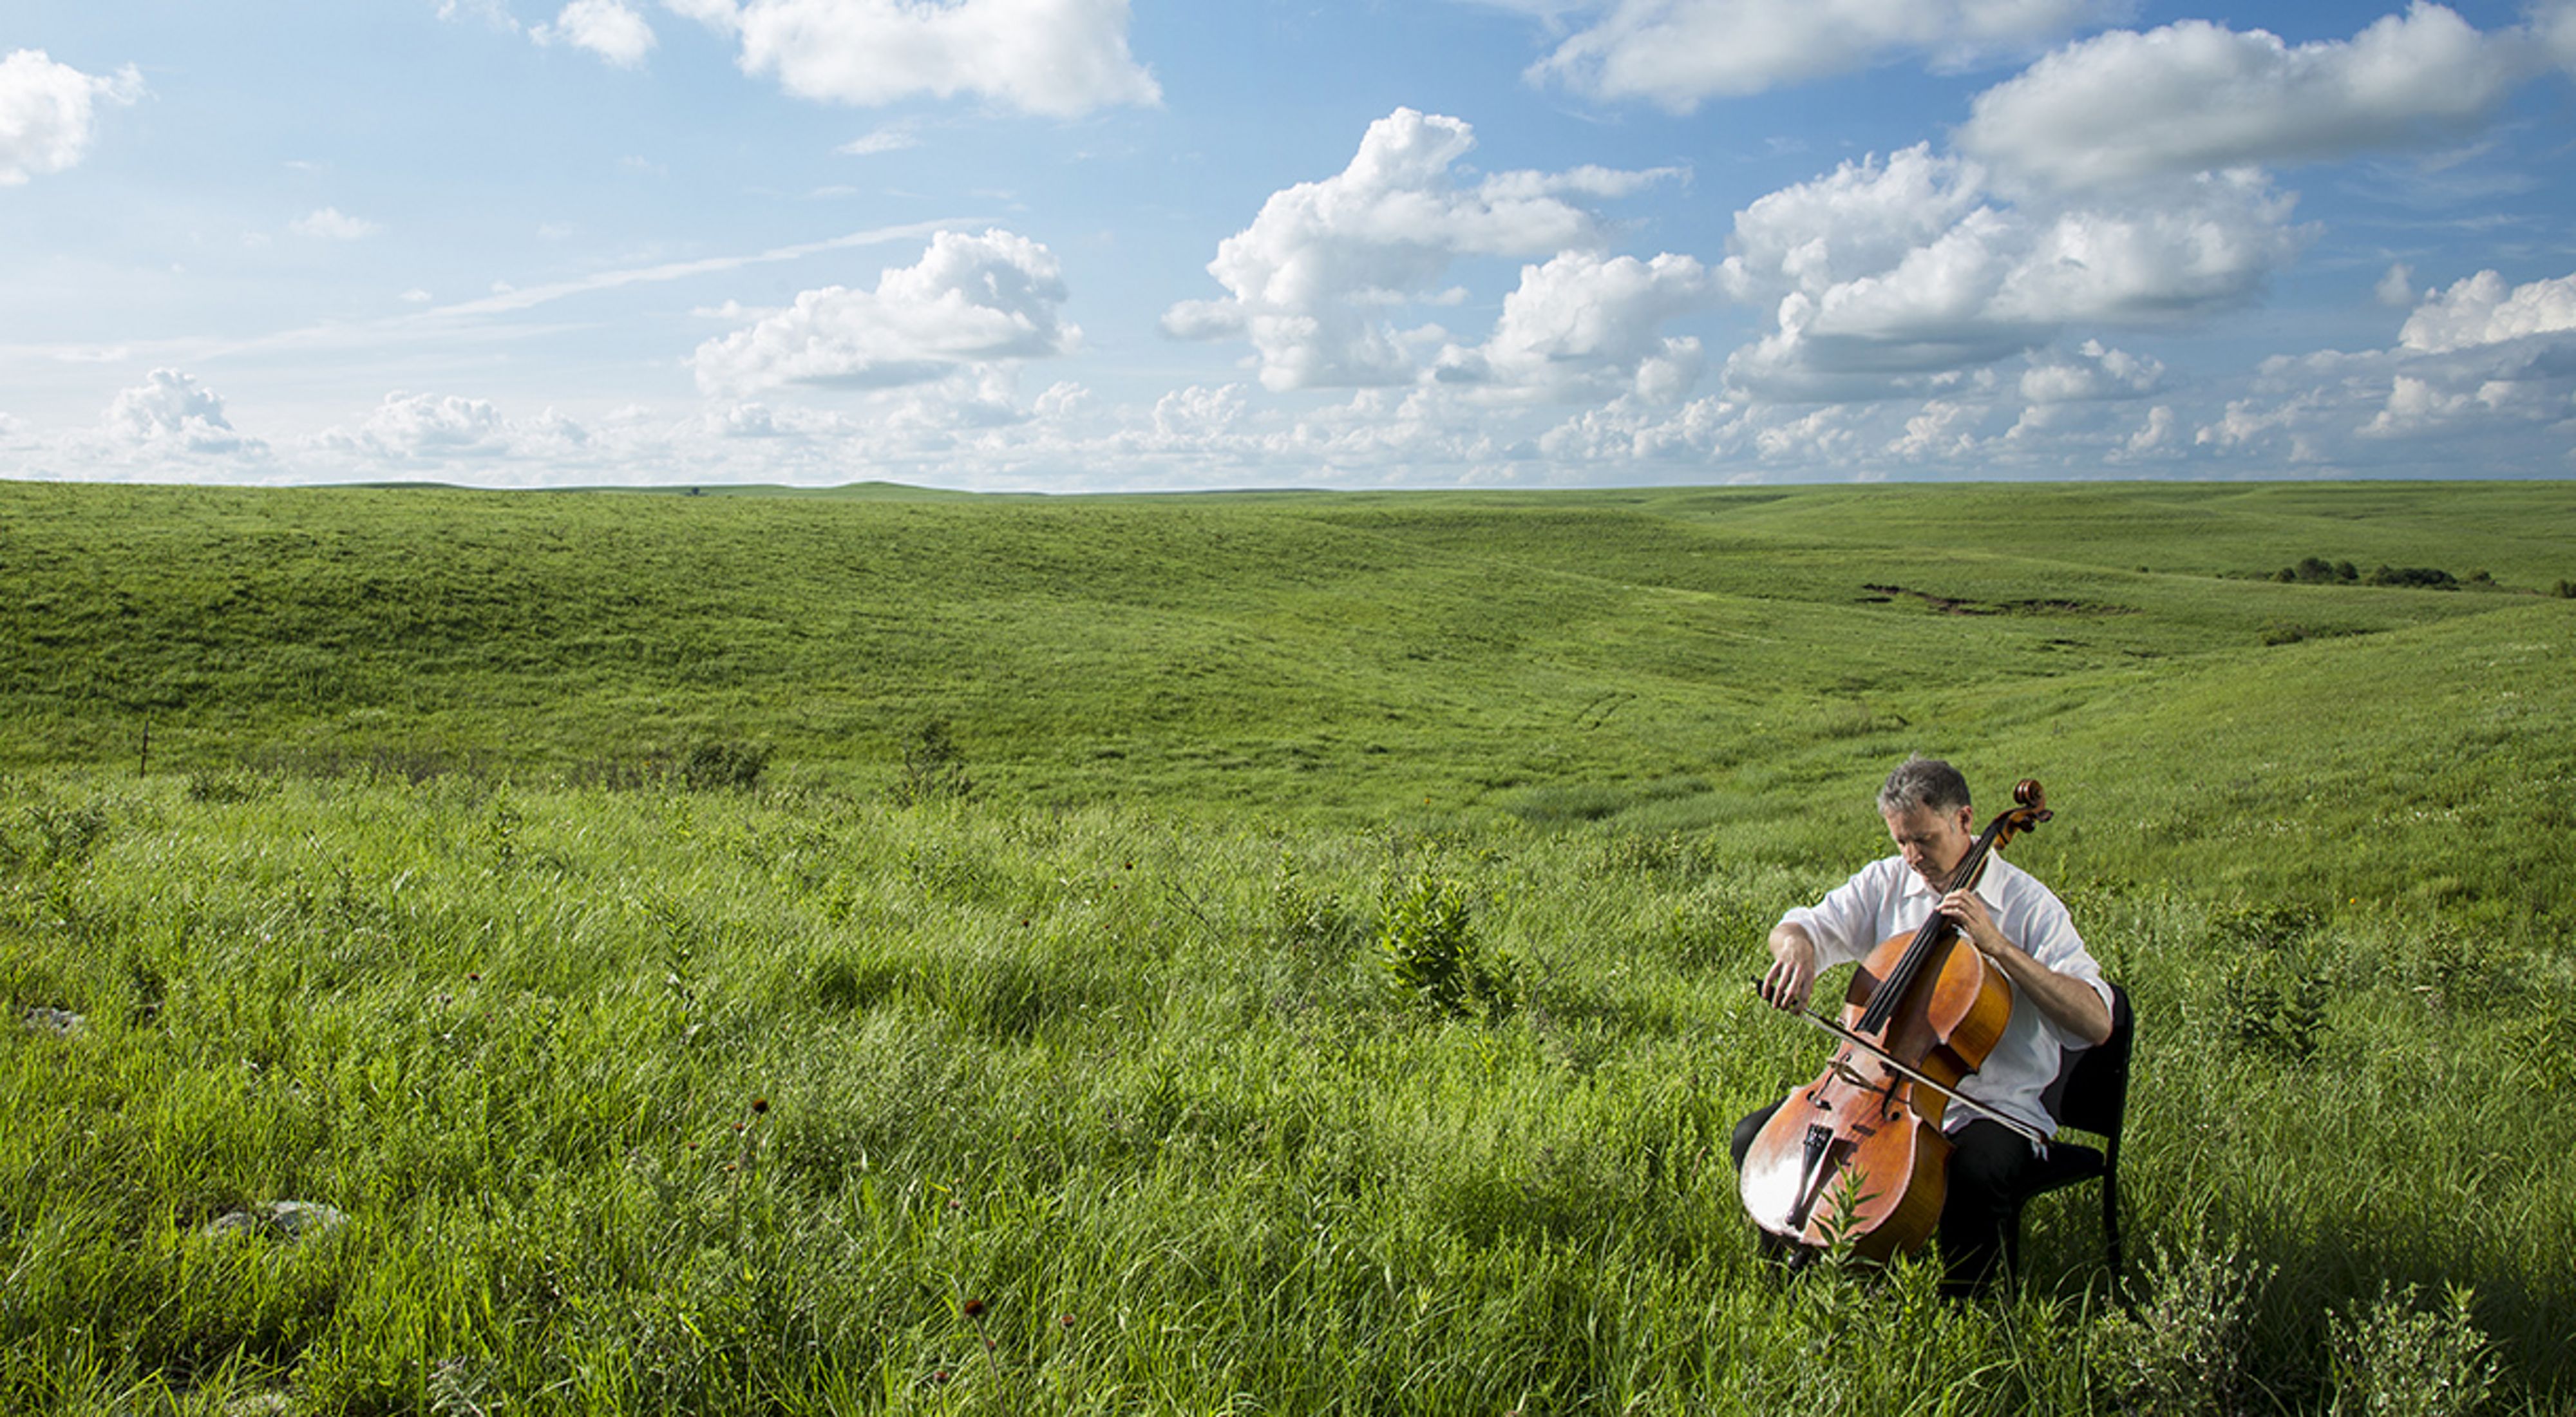 A cellist plays in a grassy field under a blue sky